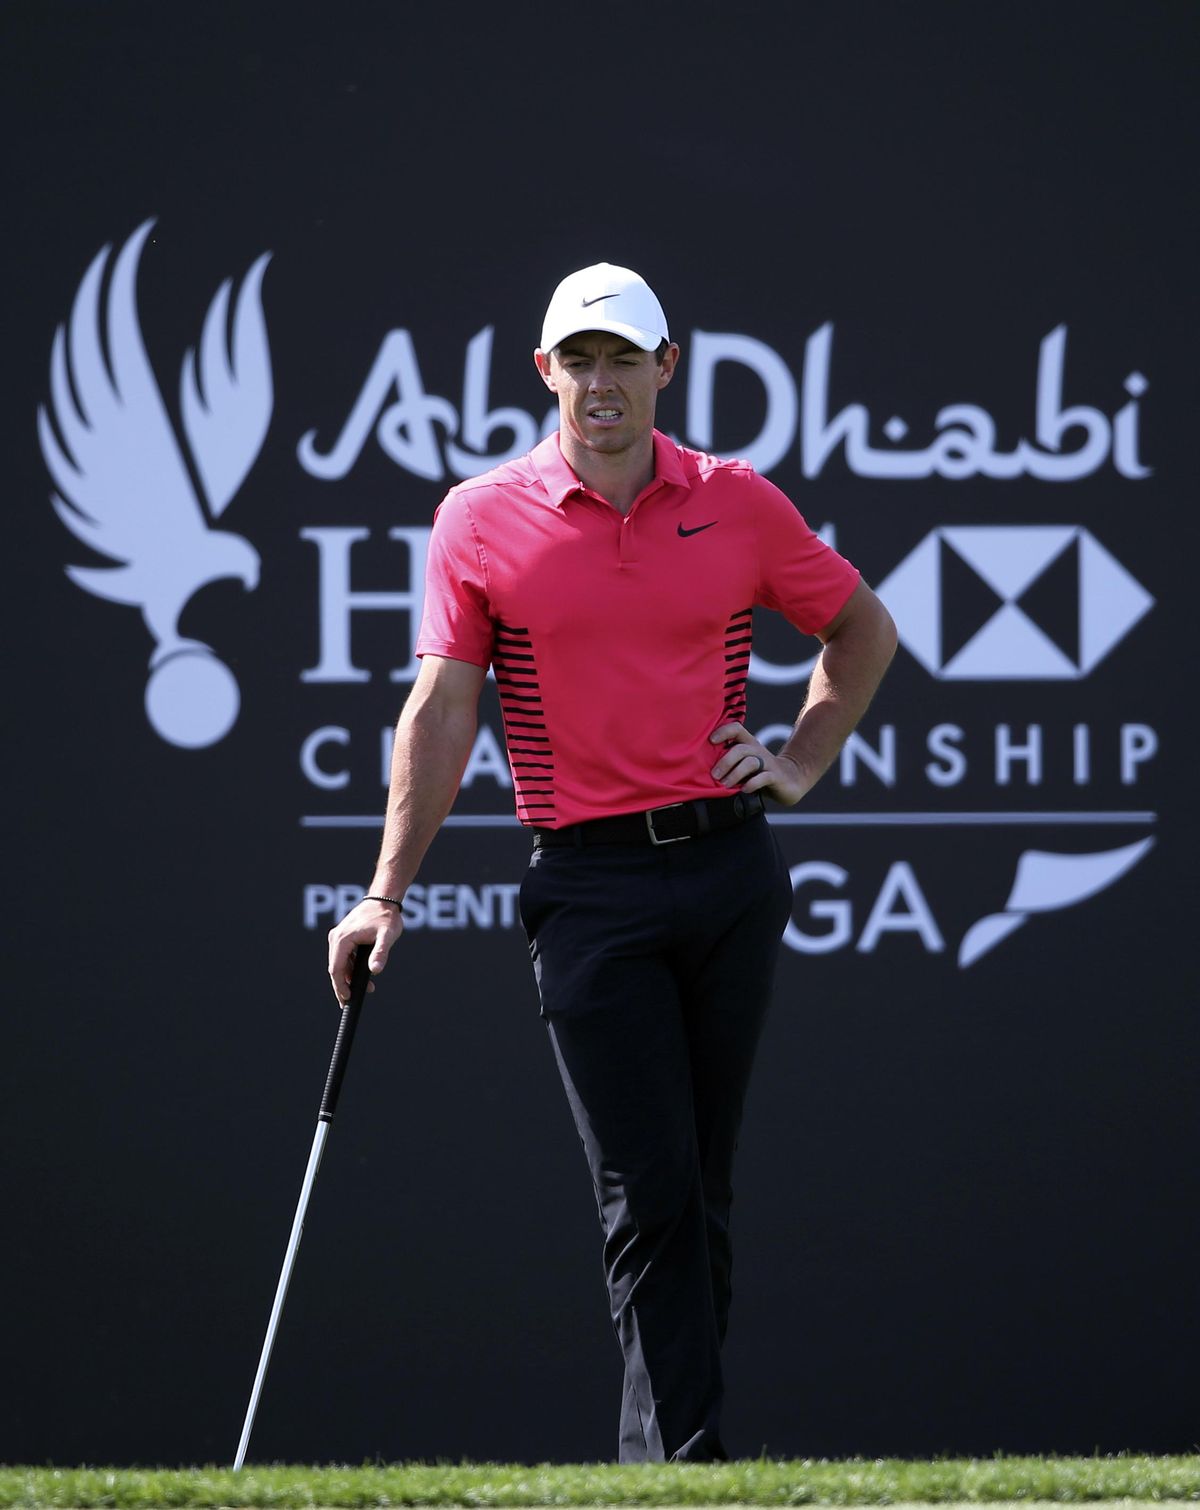 In this Saturday, Jan. 20, 2018, file photo, Northern Ireland’s Rory McIlroy reacts on the first hole during the third round of the Abu Dhabi Championship golf tournament in Abu Dhabi, United Arab Emirates. McIlroy makes his U.S. debut for this eyar at the AT&T Pebble Beach Pro-Am. (Kamran Jebreili / Associated Press)